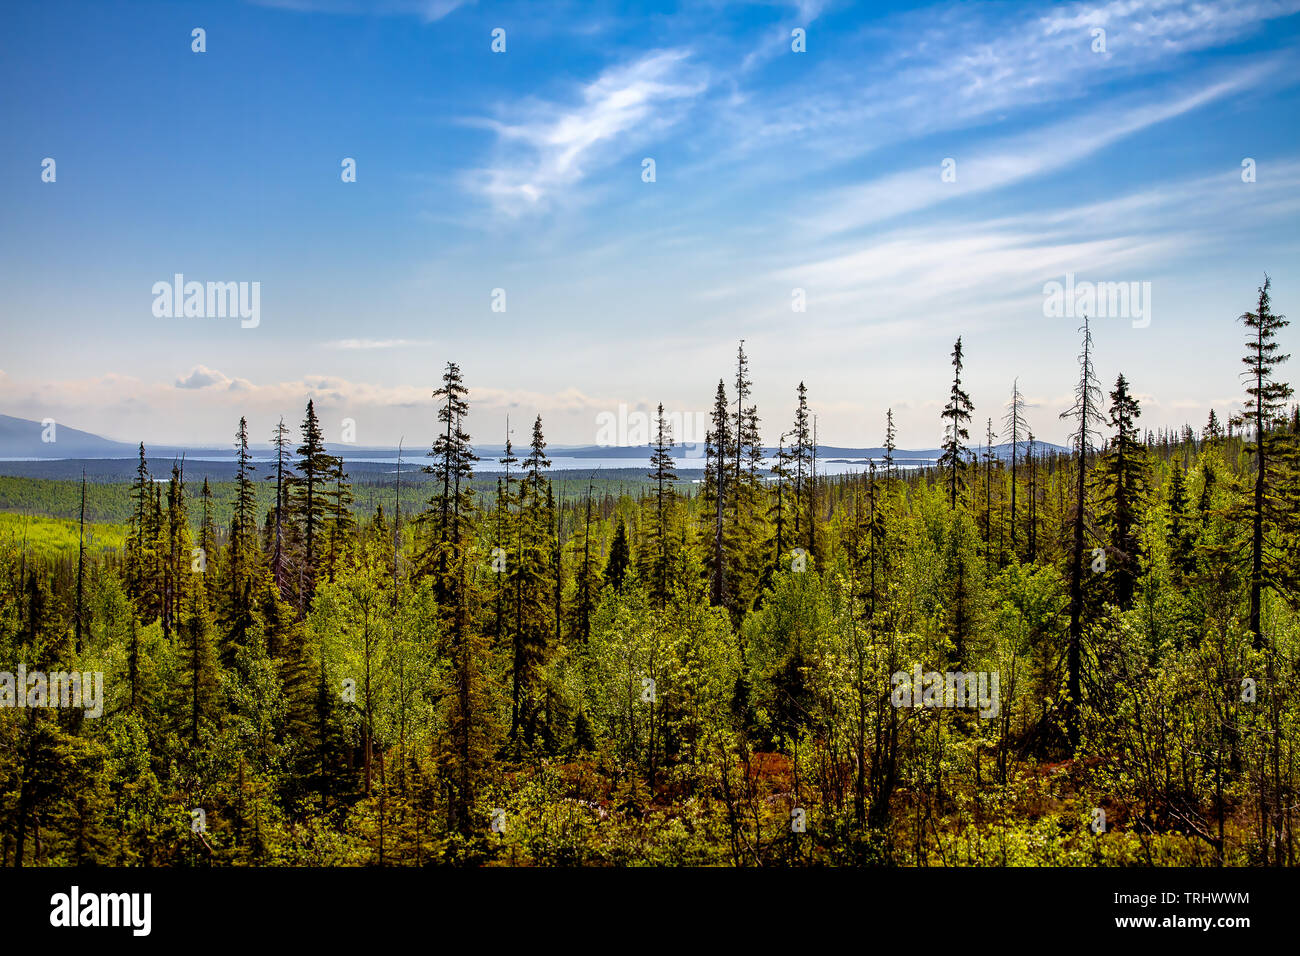 Northern forest landscape. Taiga and mountains on the horizon. Russia Stock Photo